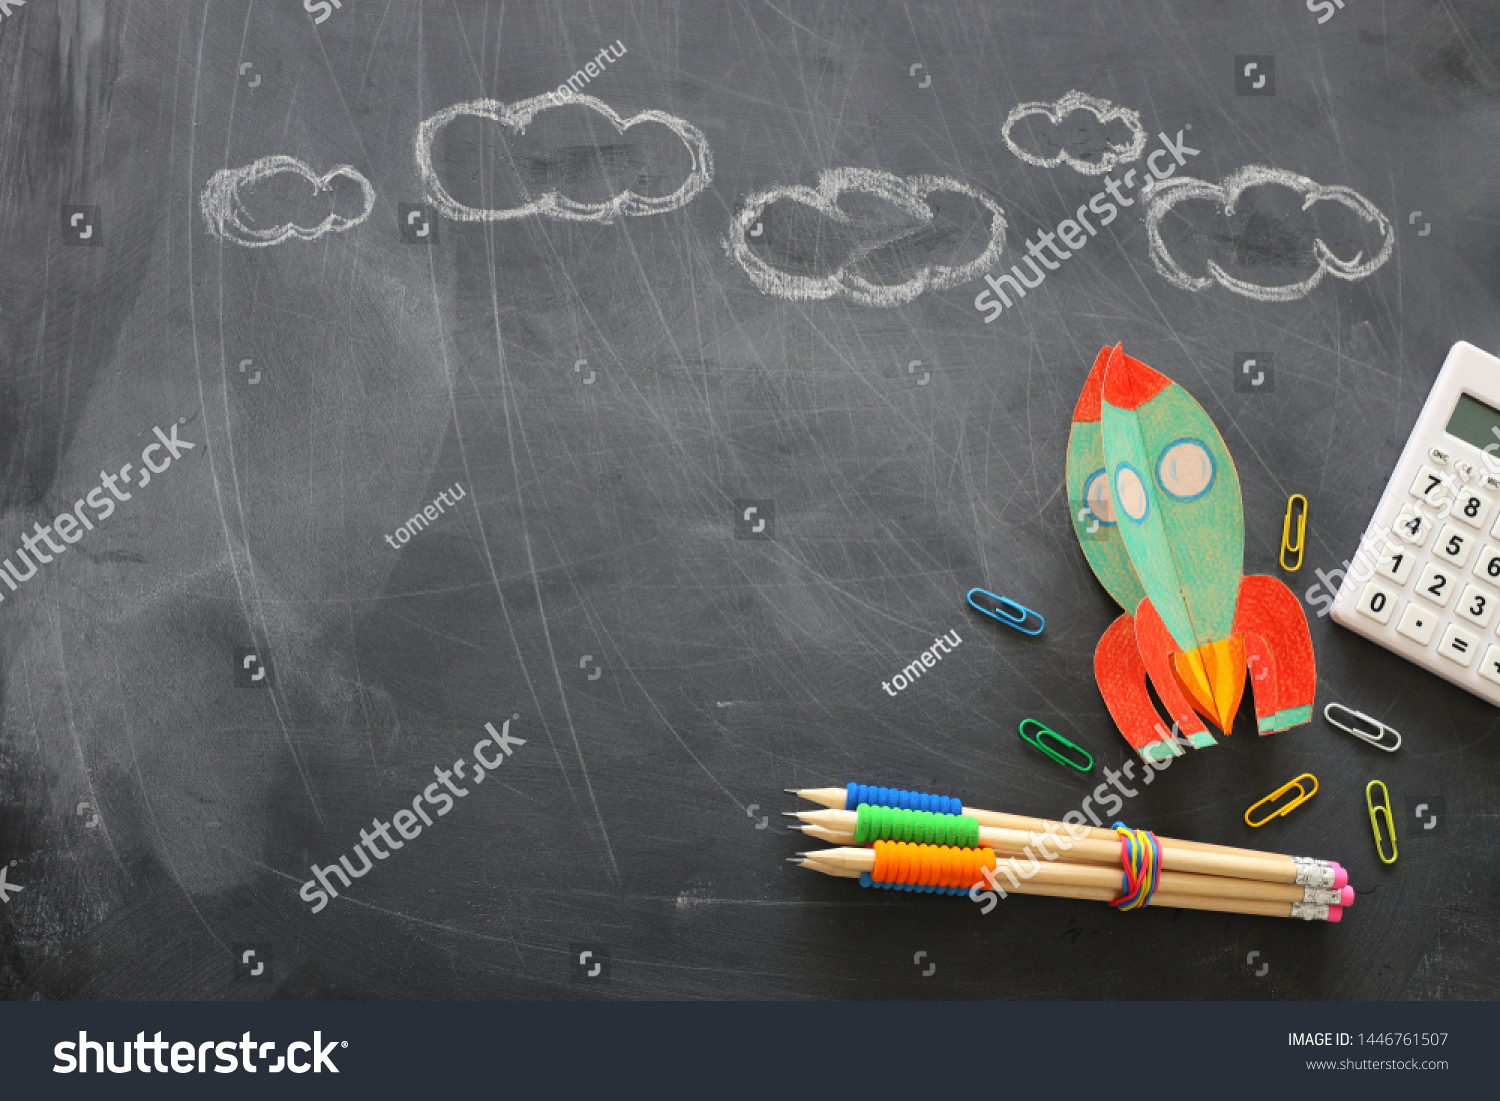 education. Back to school concept. rocket cut from paper and painted over blackboard background. top view, flat lay #1446761507